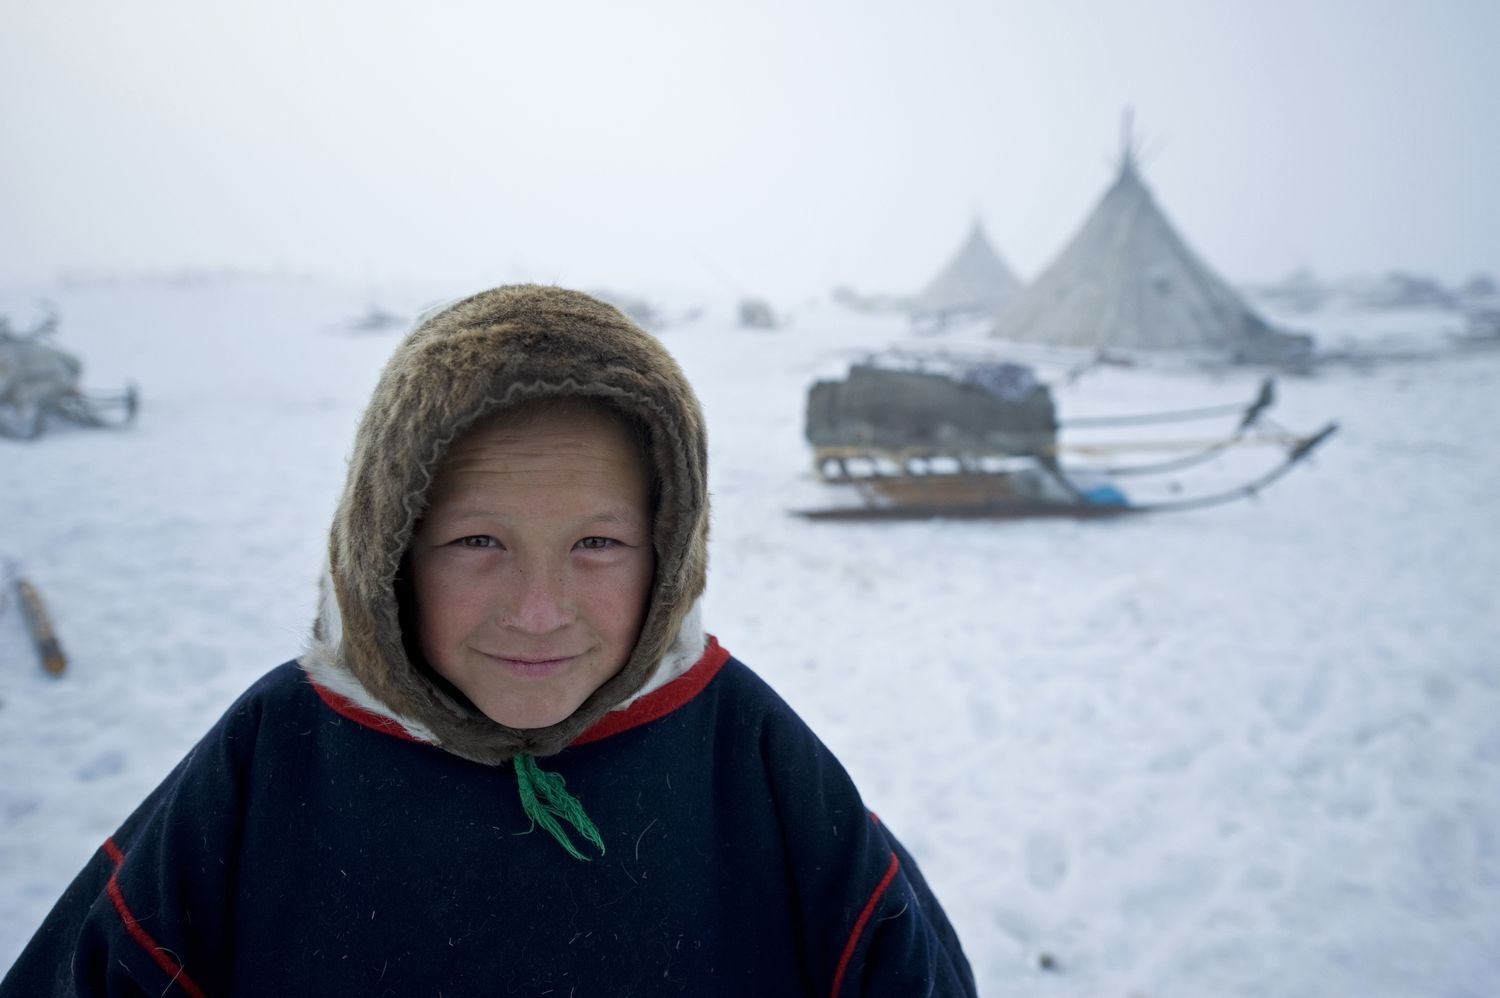 A Nenets boy. The Nenets are an indigenous group native to Siberia.